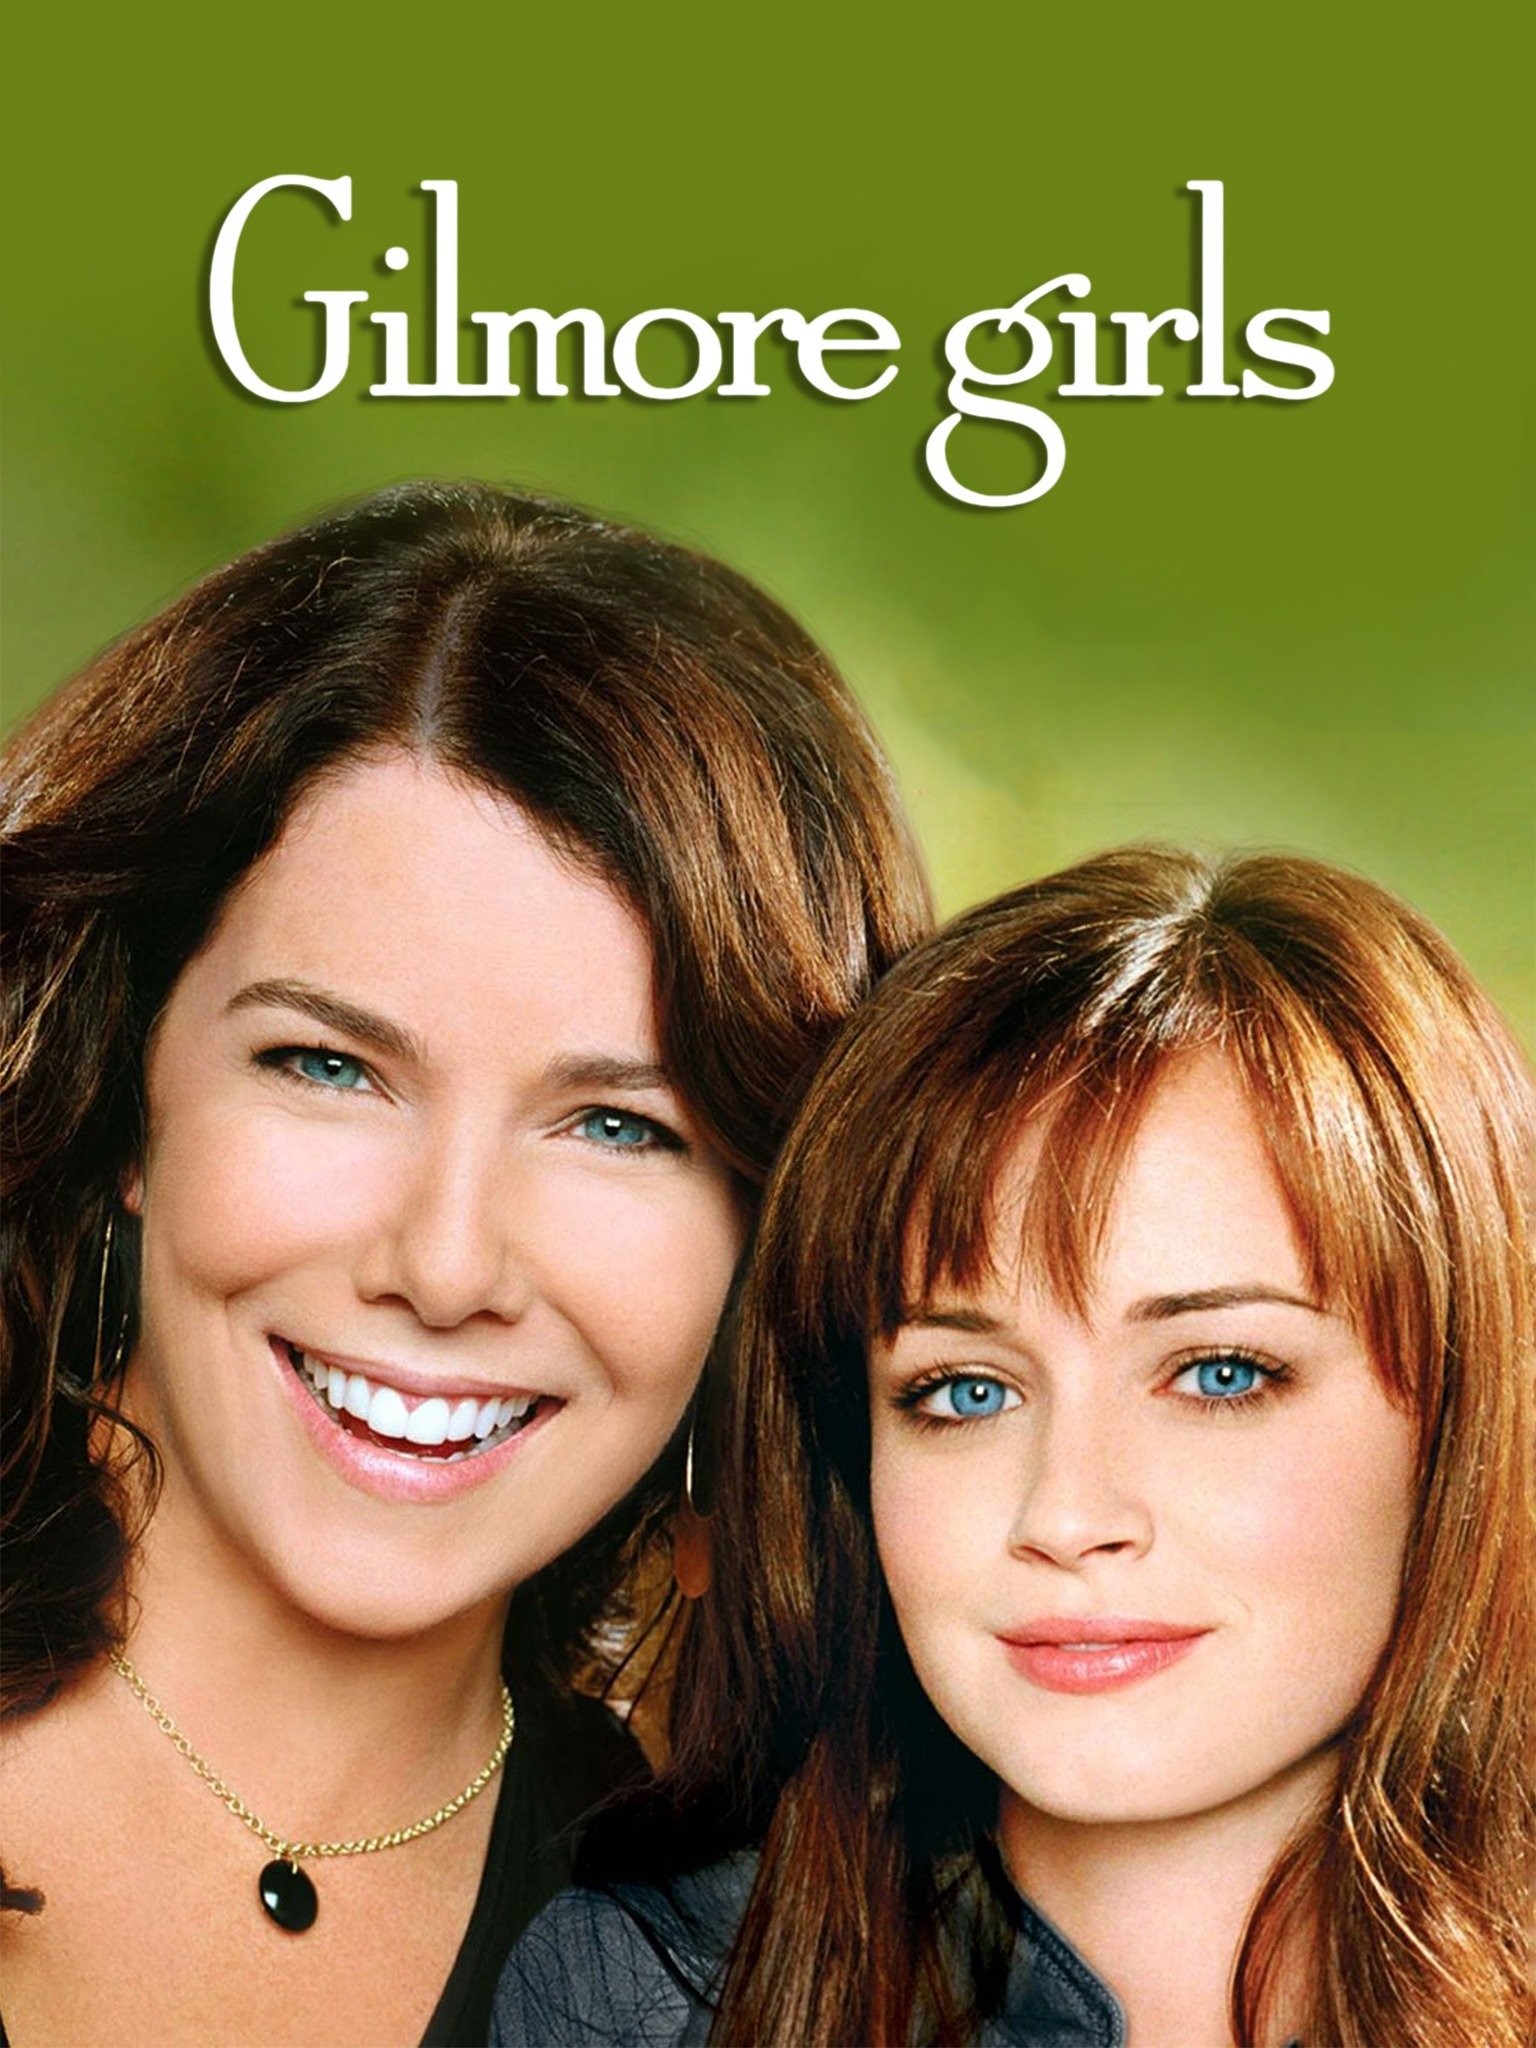 15 times we fell in love with 'Gilmore Girls